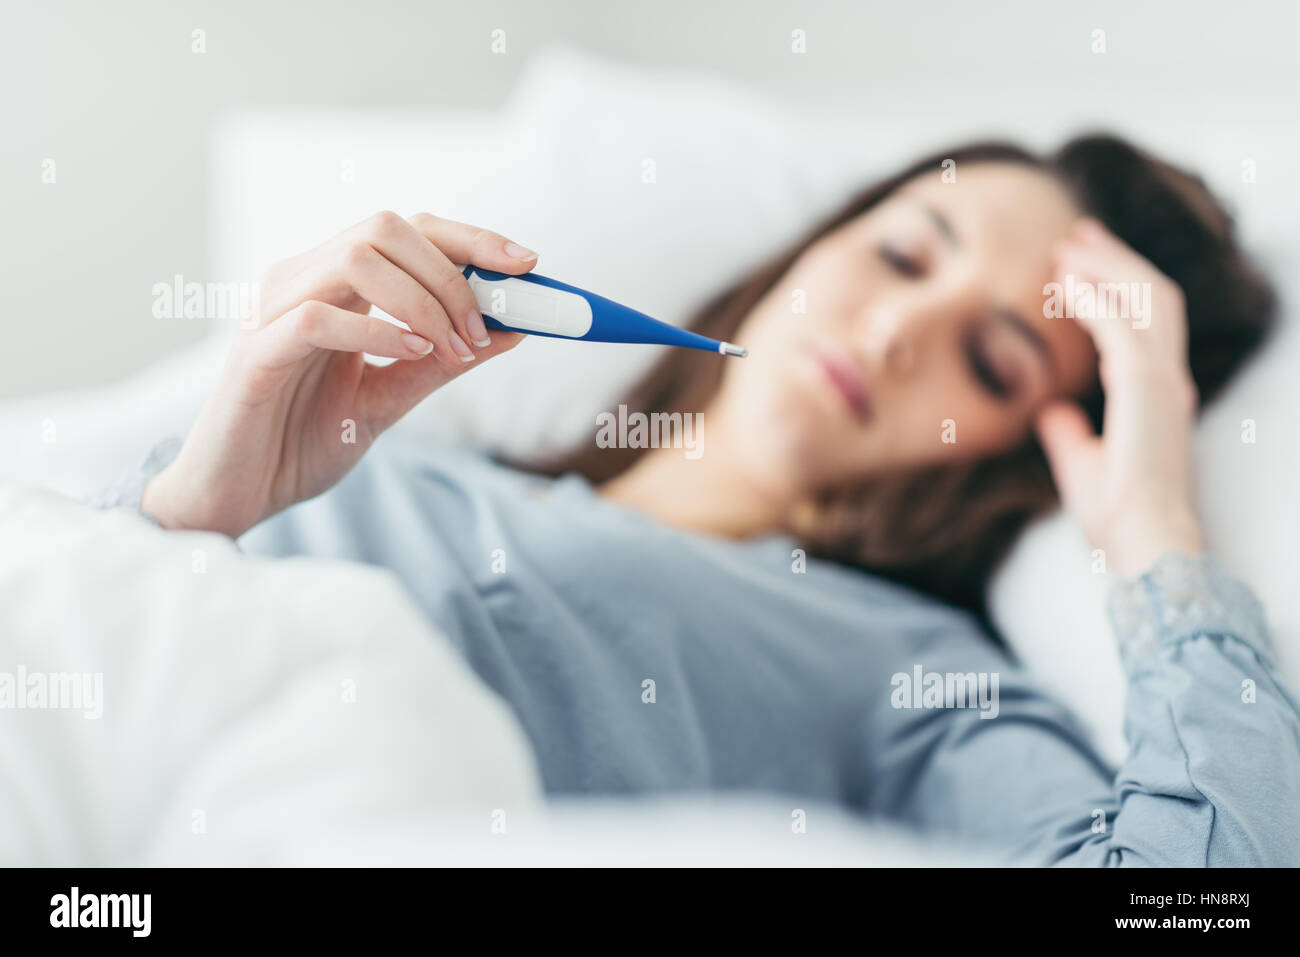 Woman with flu virus lying in bed, she is measuring her temperature with a thermometer and touching her forehead Stock Photo